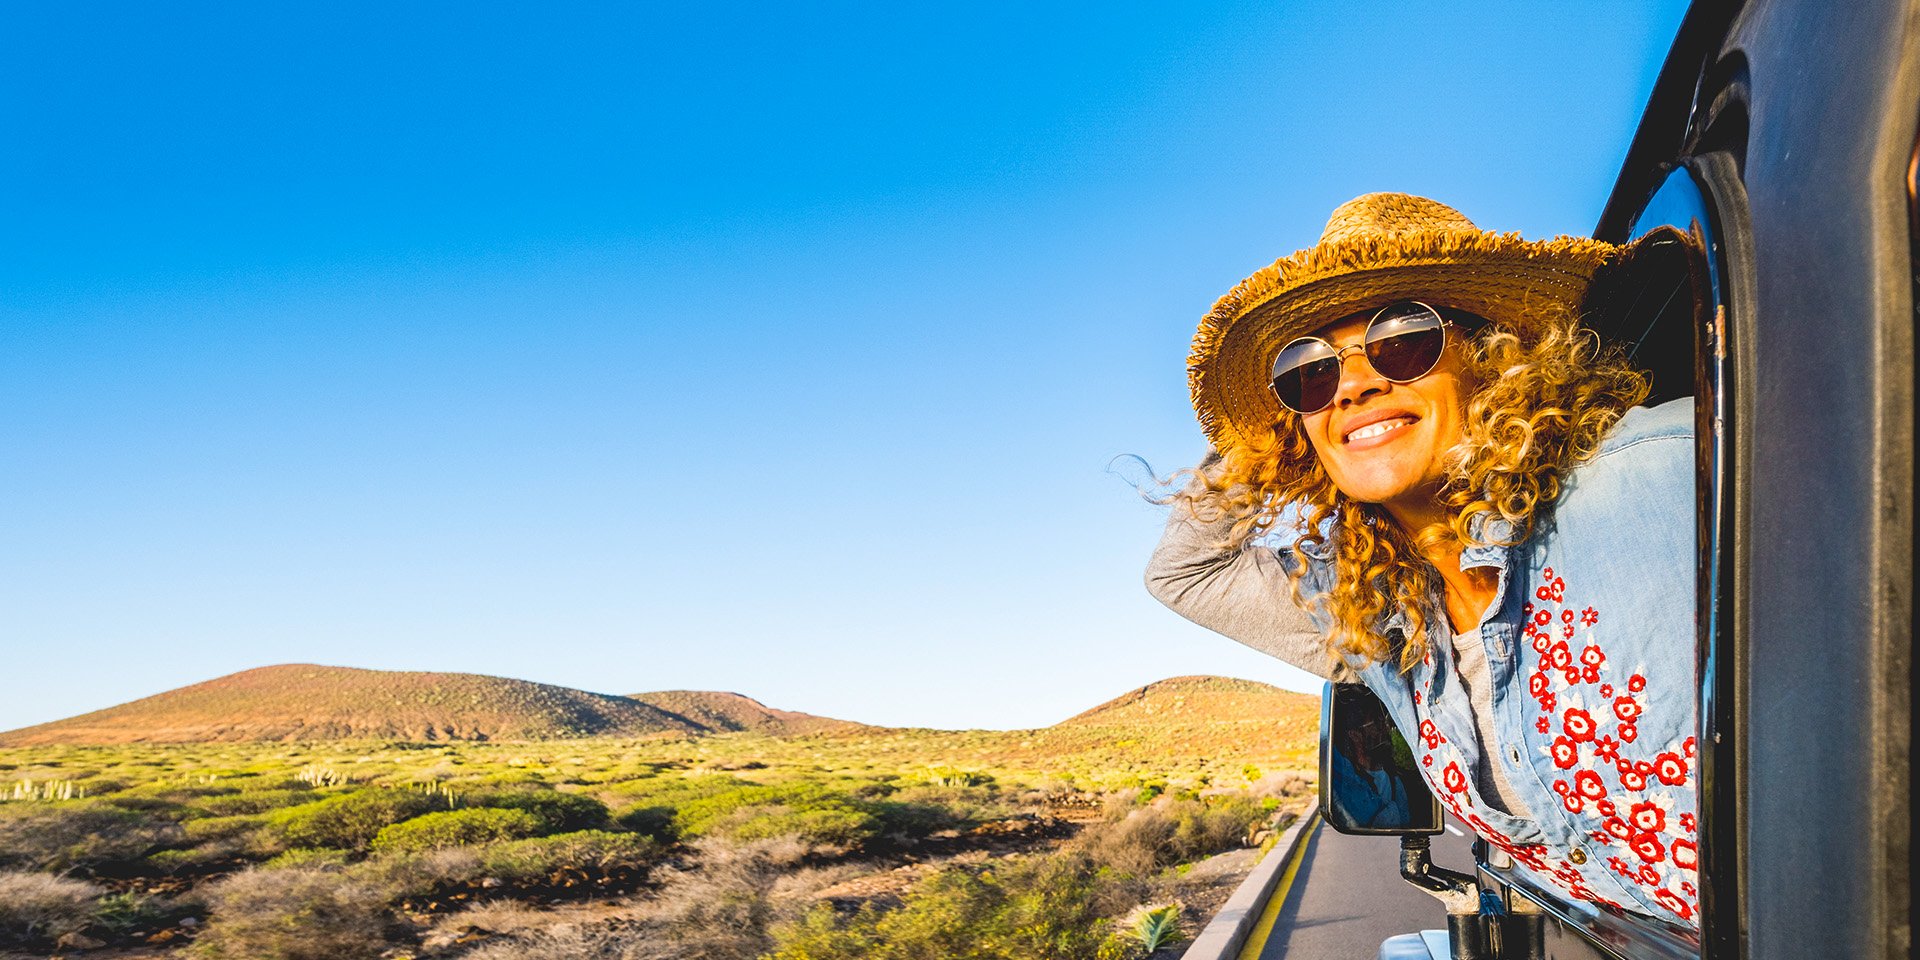 A happy woman in a straw hat and sunglasses hanging out of a car window driving down a paved road in the desert.